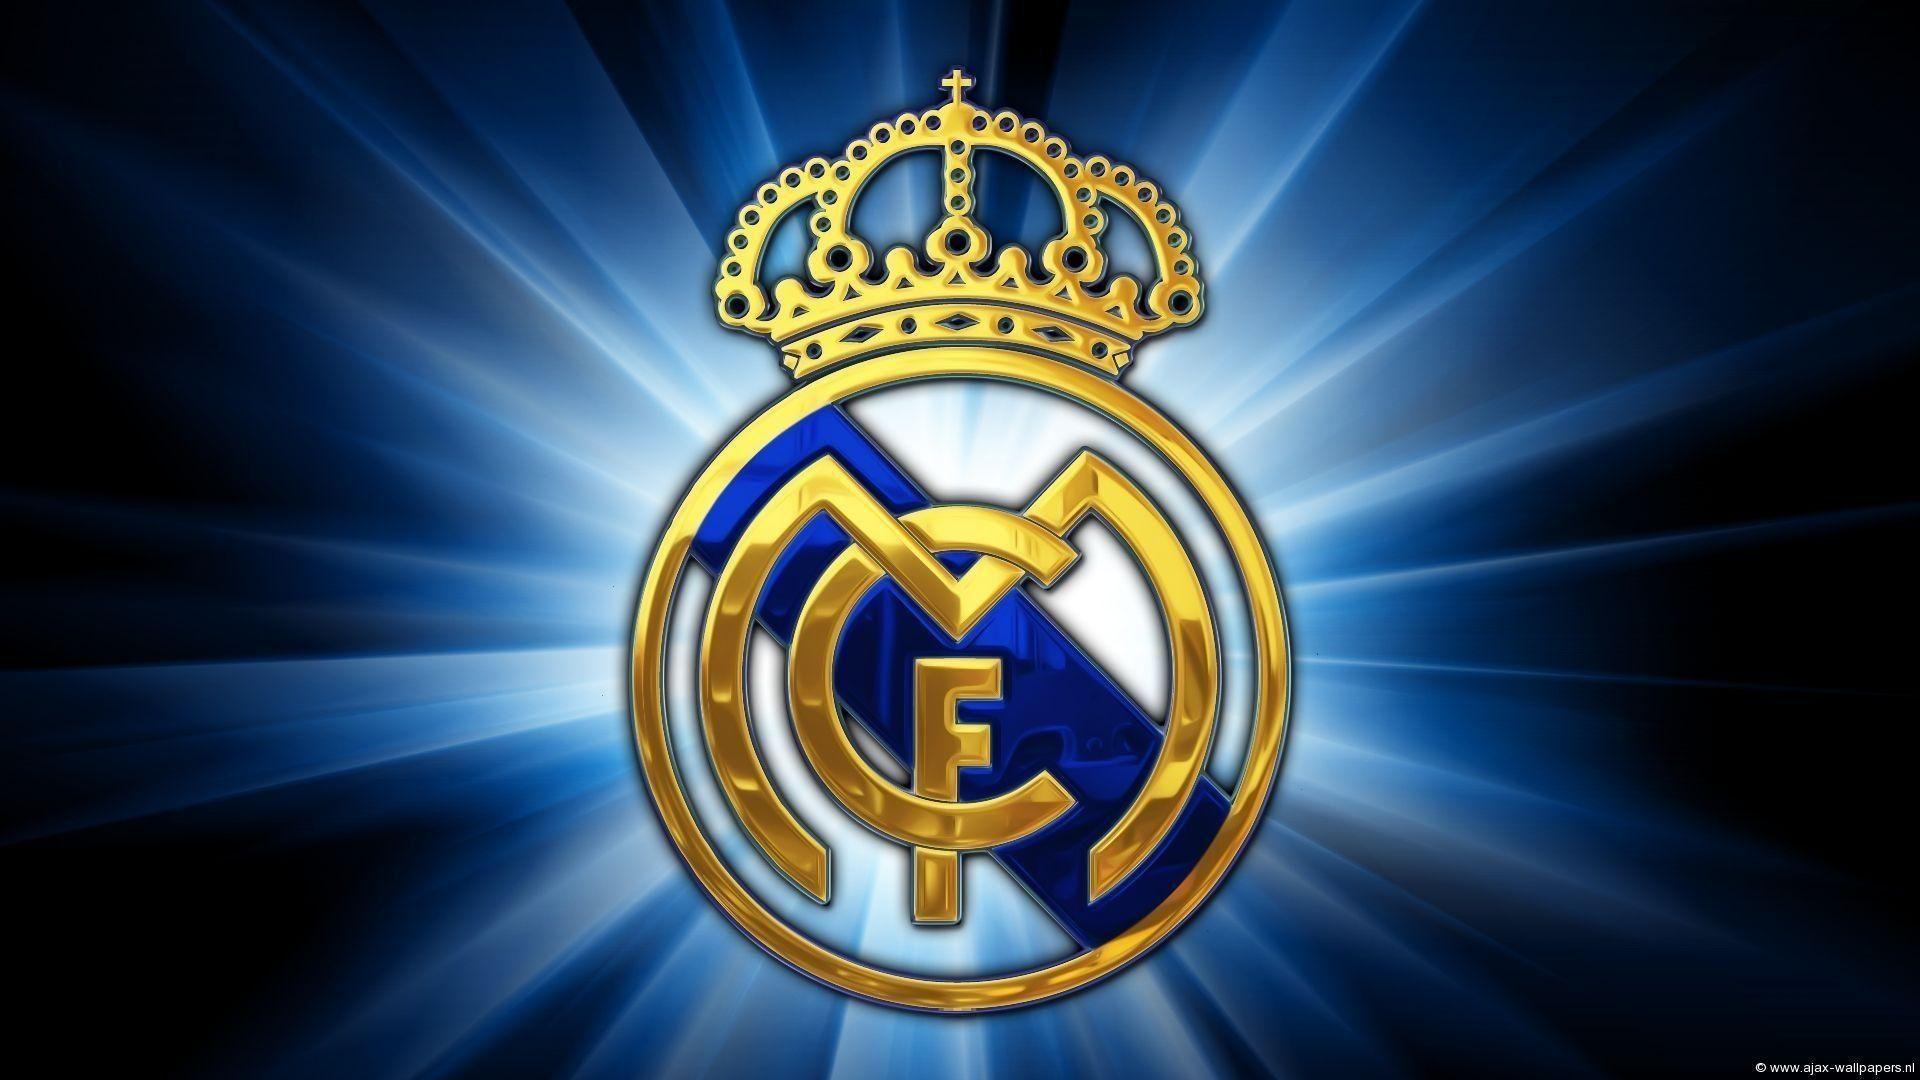 Best Cool Real Madrid Logo FULL HD 1080p For PC Background. Real madrid logo wallpaper, Madrid wallpaper, Real madrid wallpaper